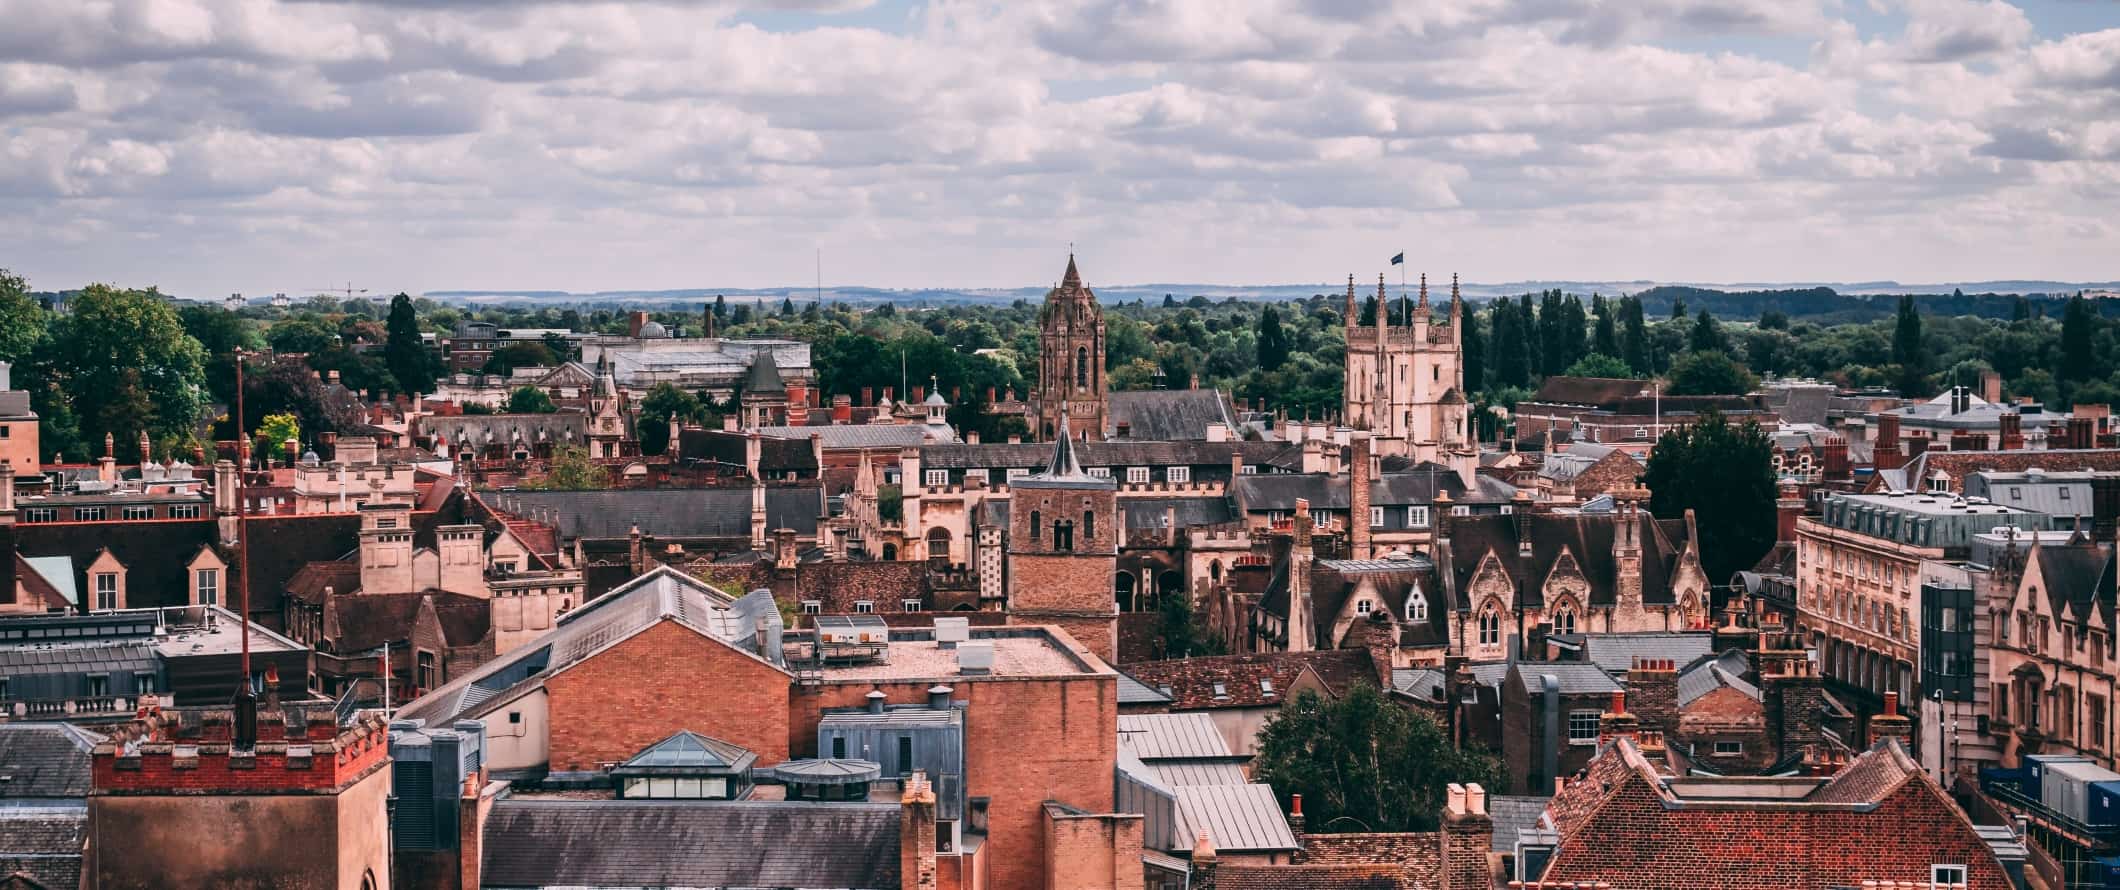 View over the rooftops of Cambridge, England